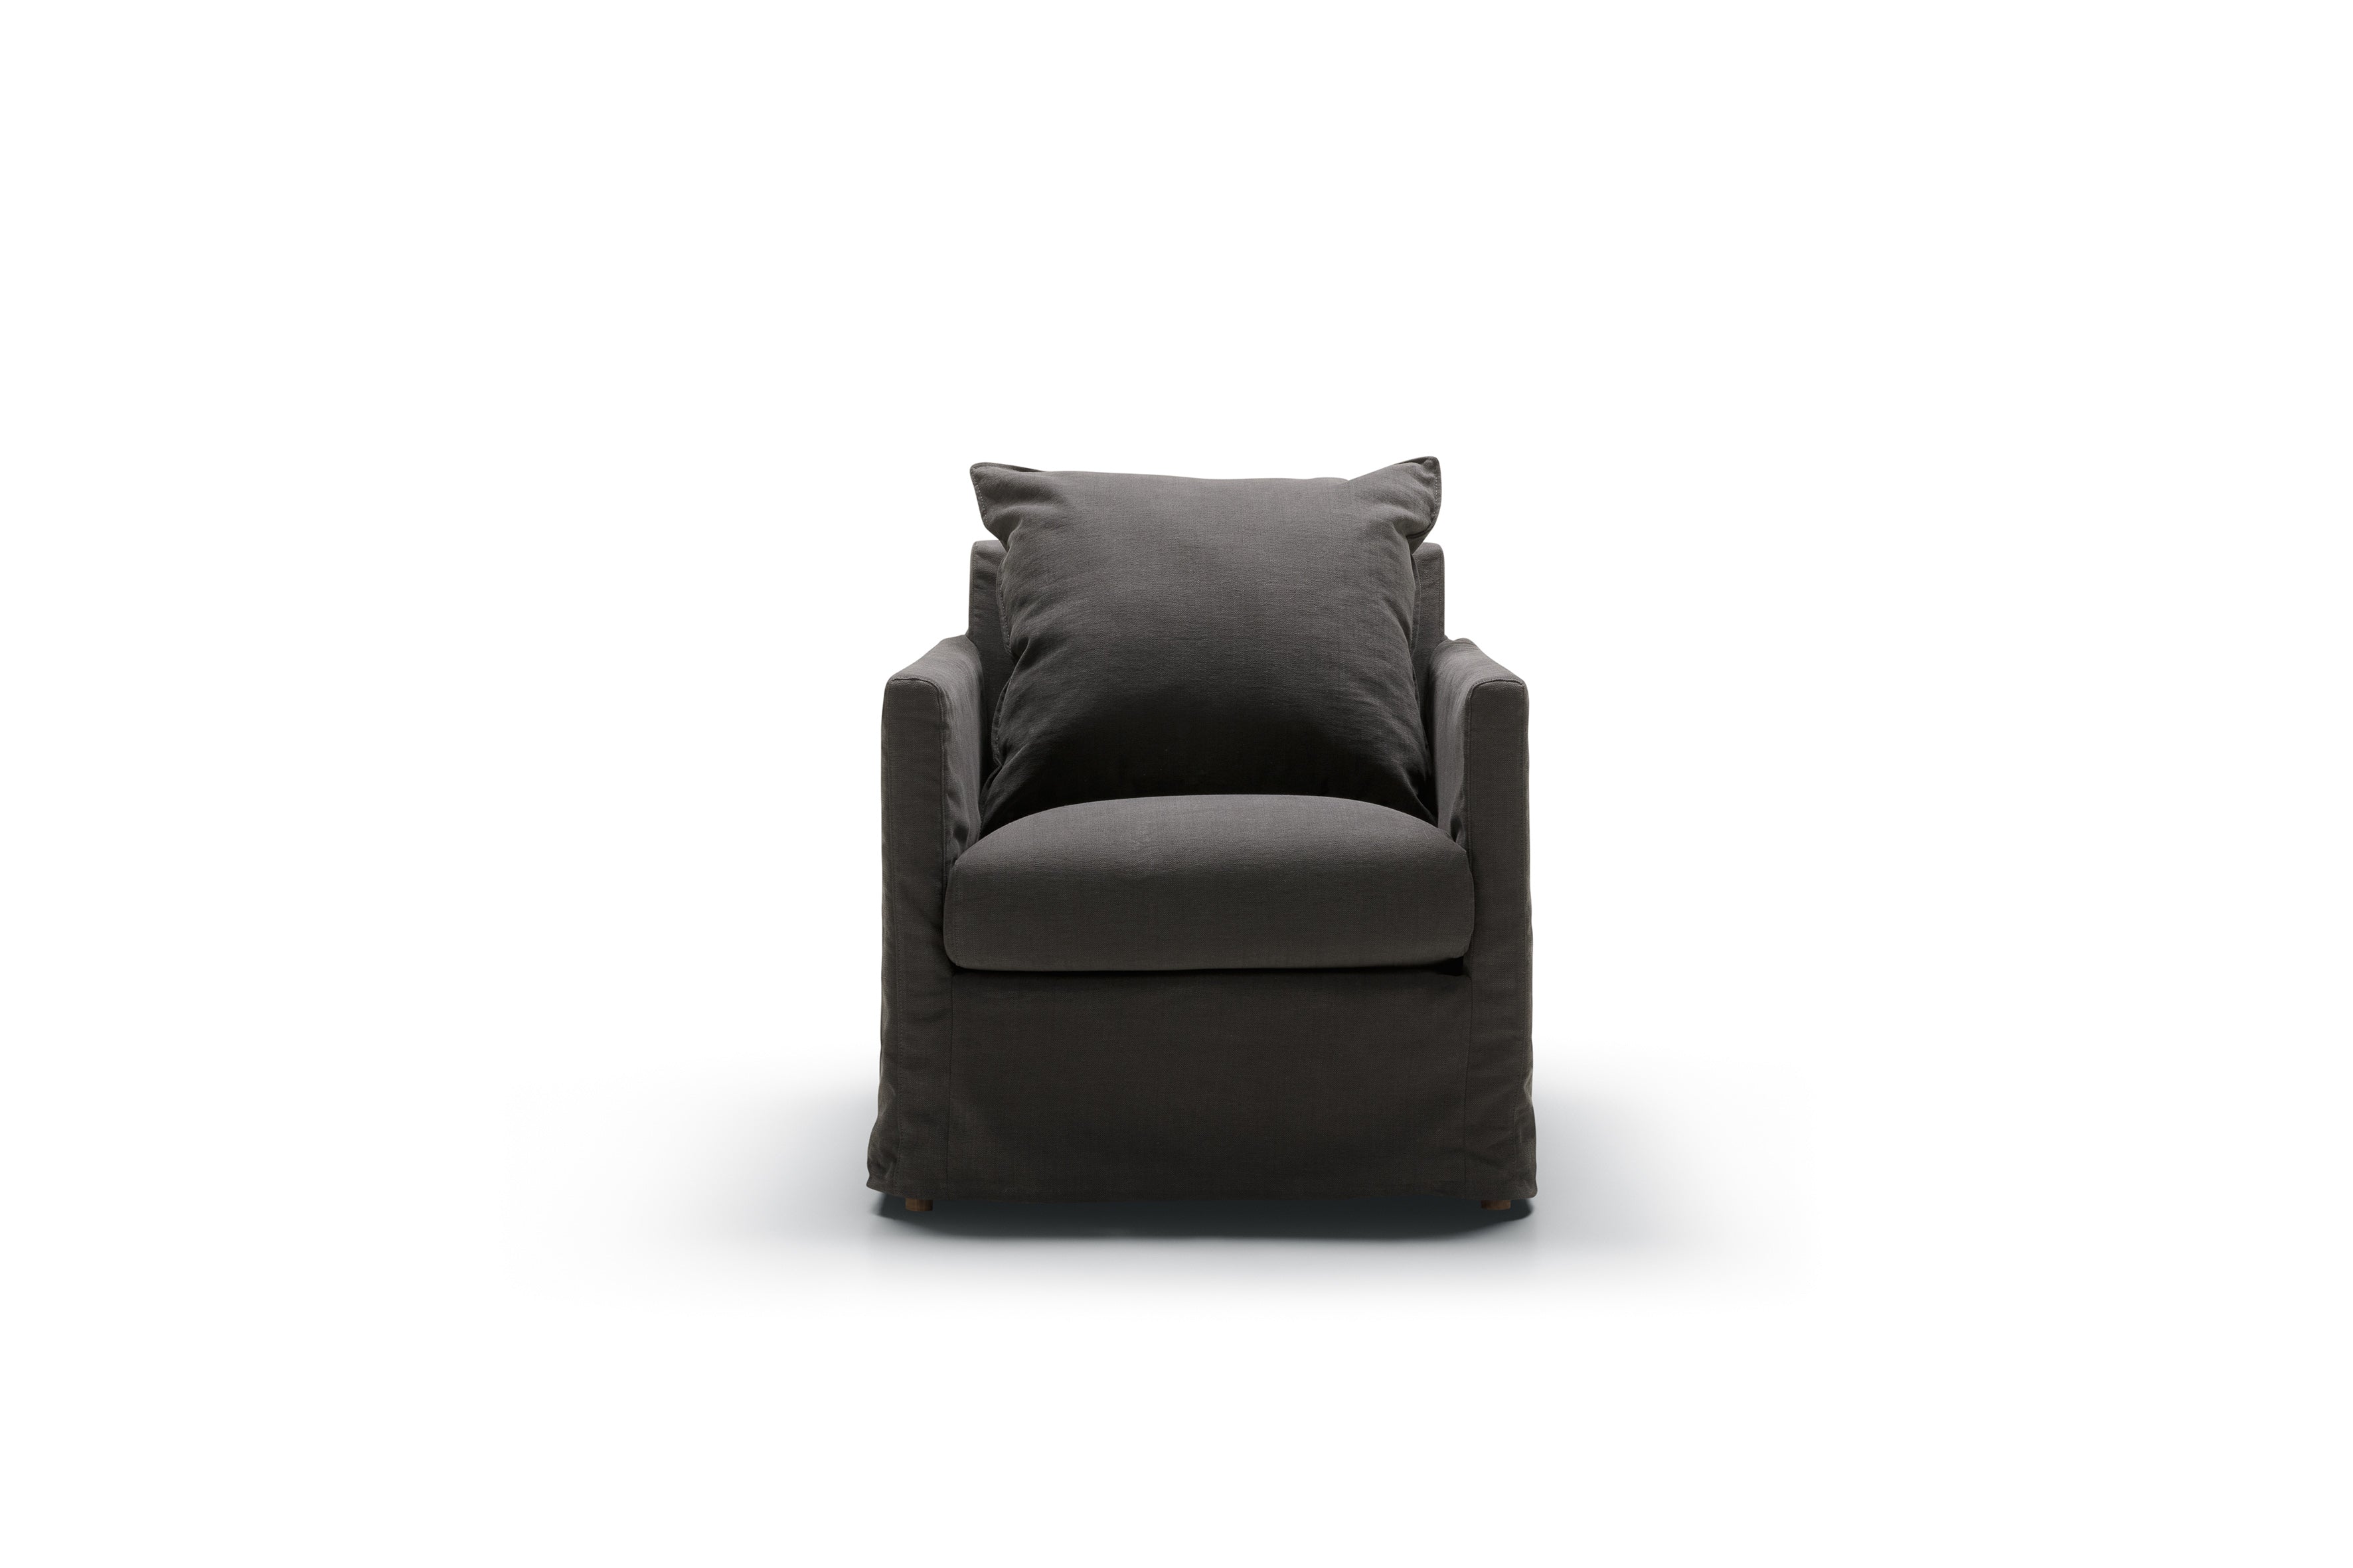 Mastrella Sia Armchair with Loose Cover